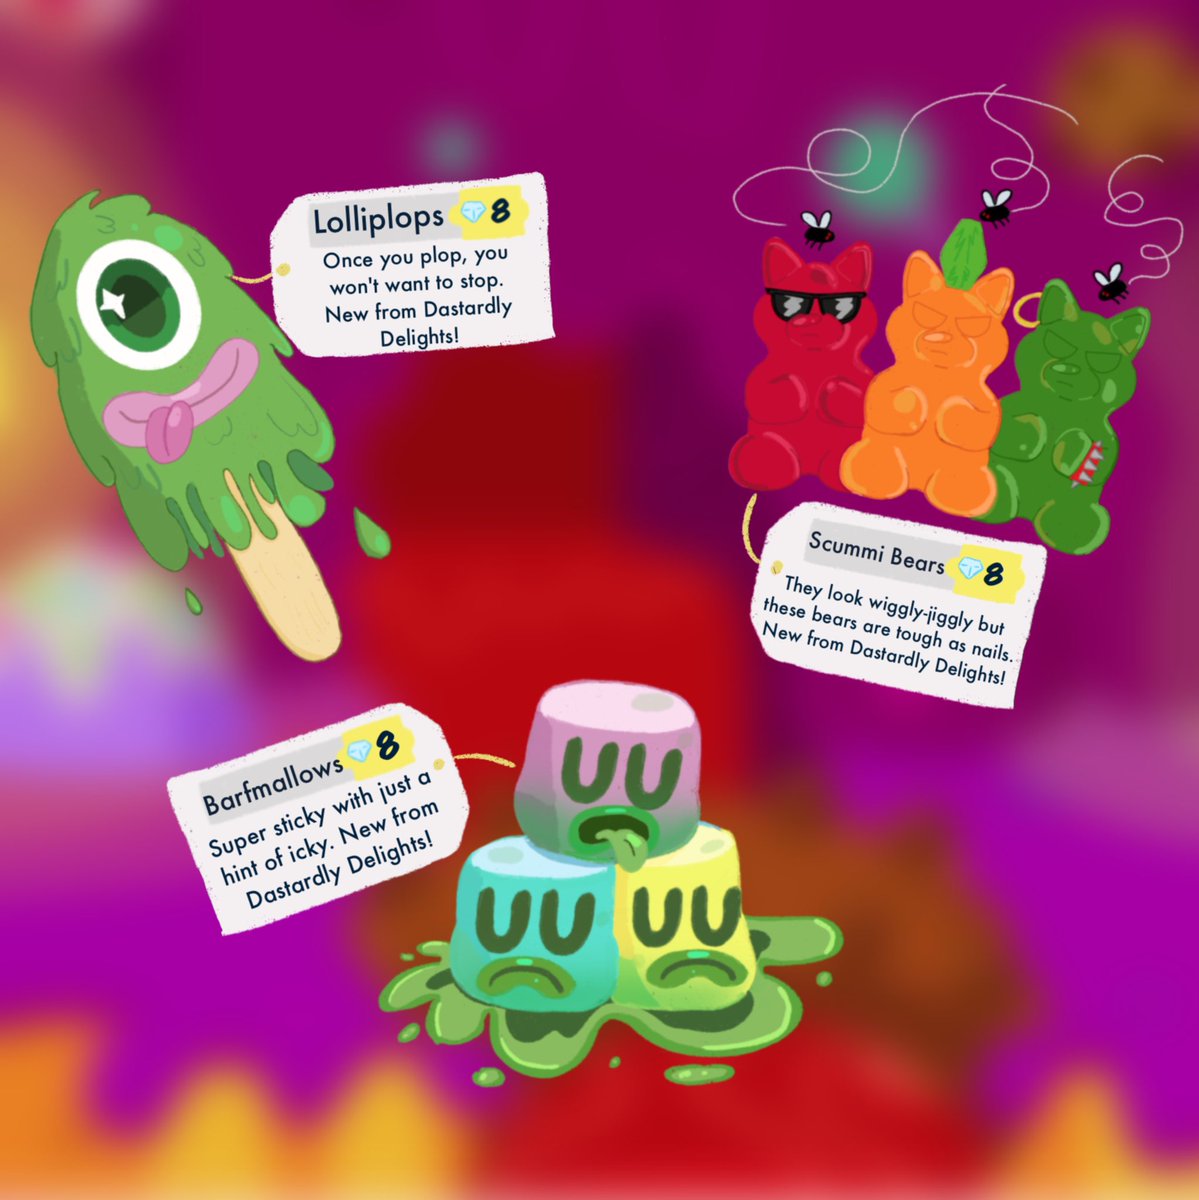 i never shared here i just realised. i’m proud of these:3 

#moshimonsters